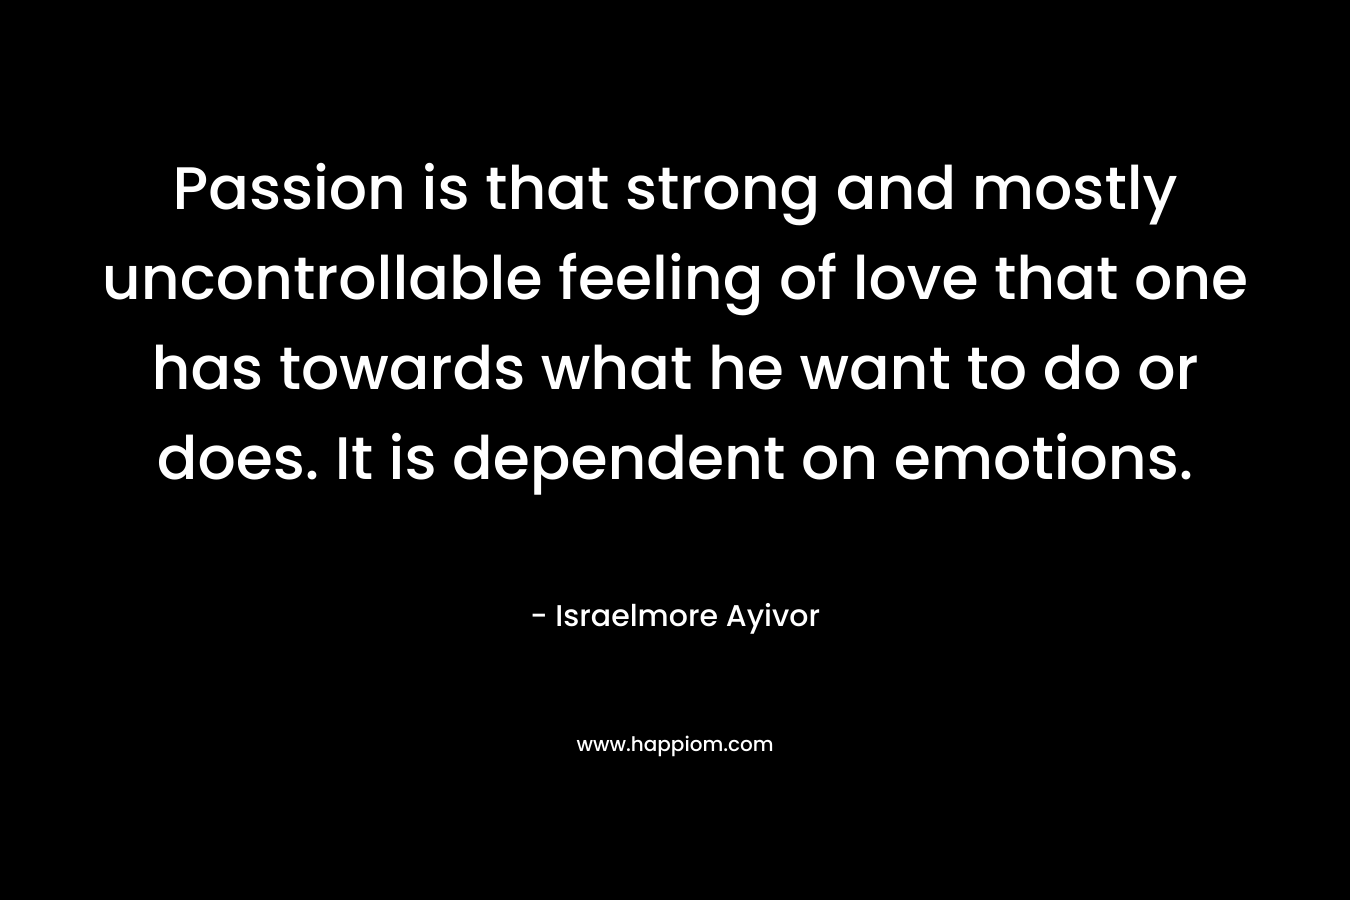 Passion is that strong and mostly uncontrollable feeling of love that one has towards what he want to do or does. It is dependent on emotions.